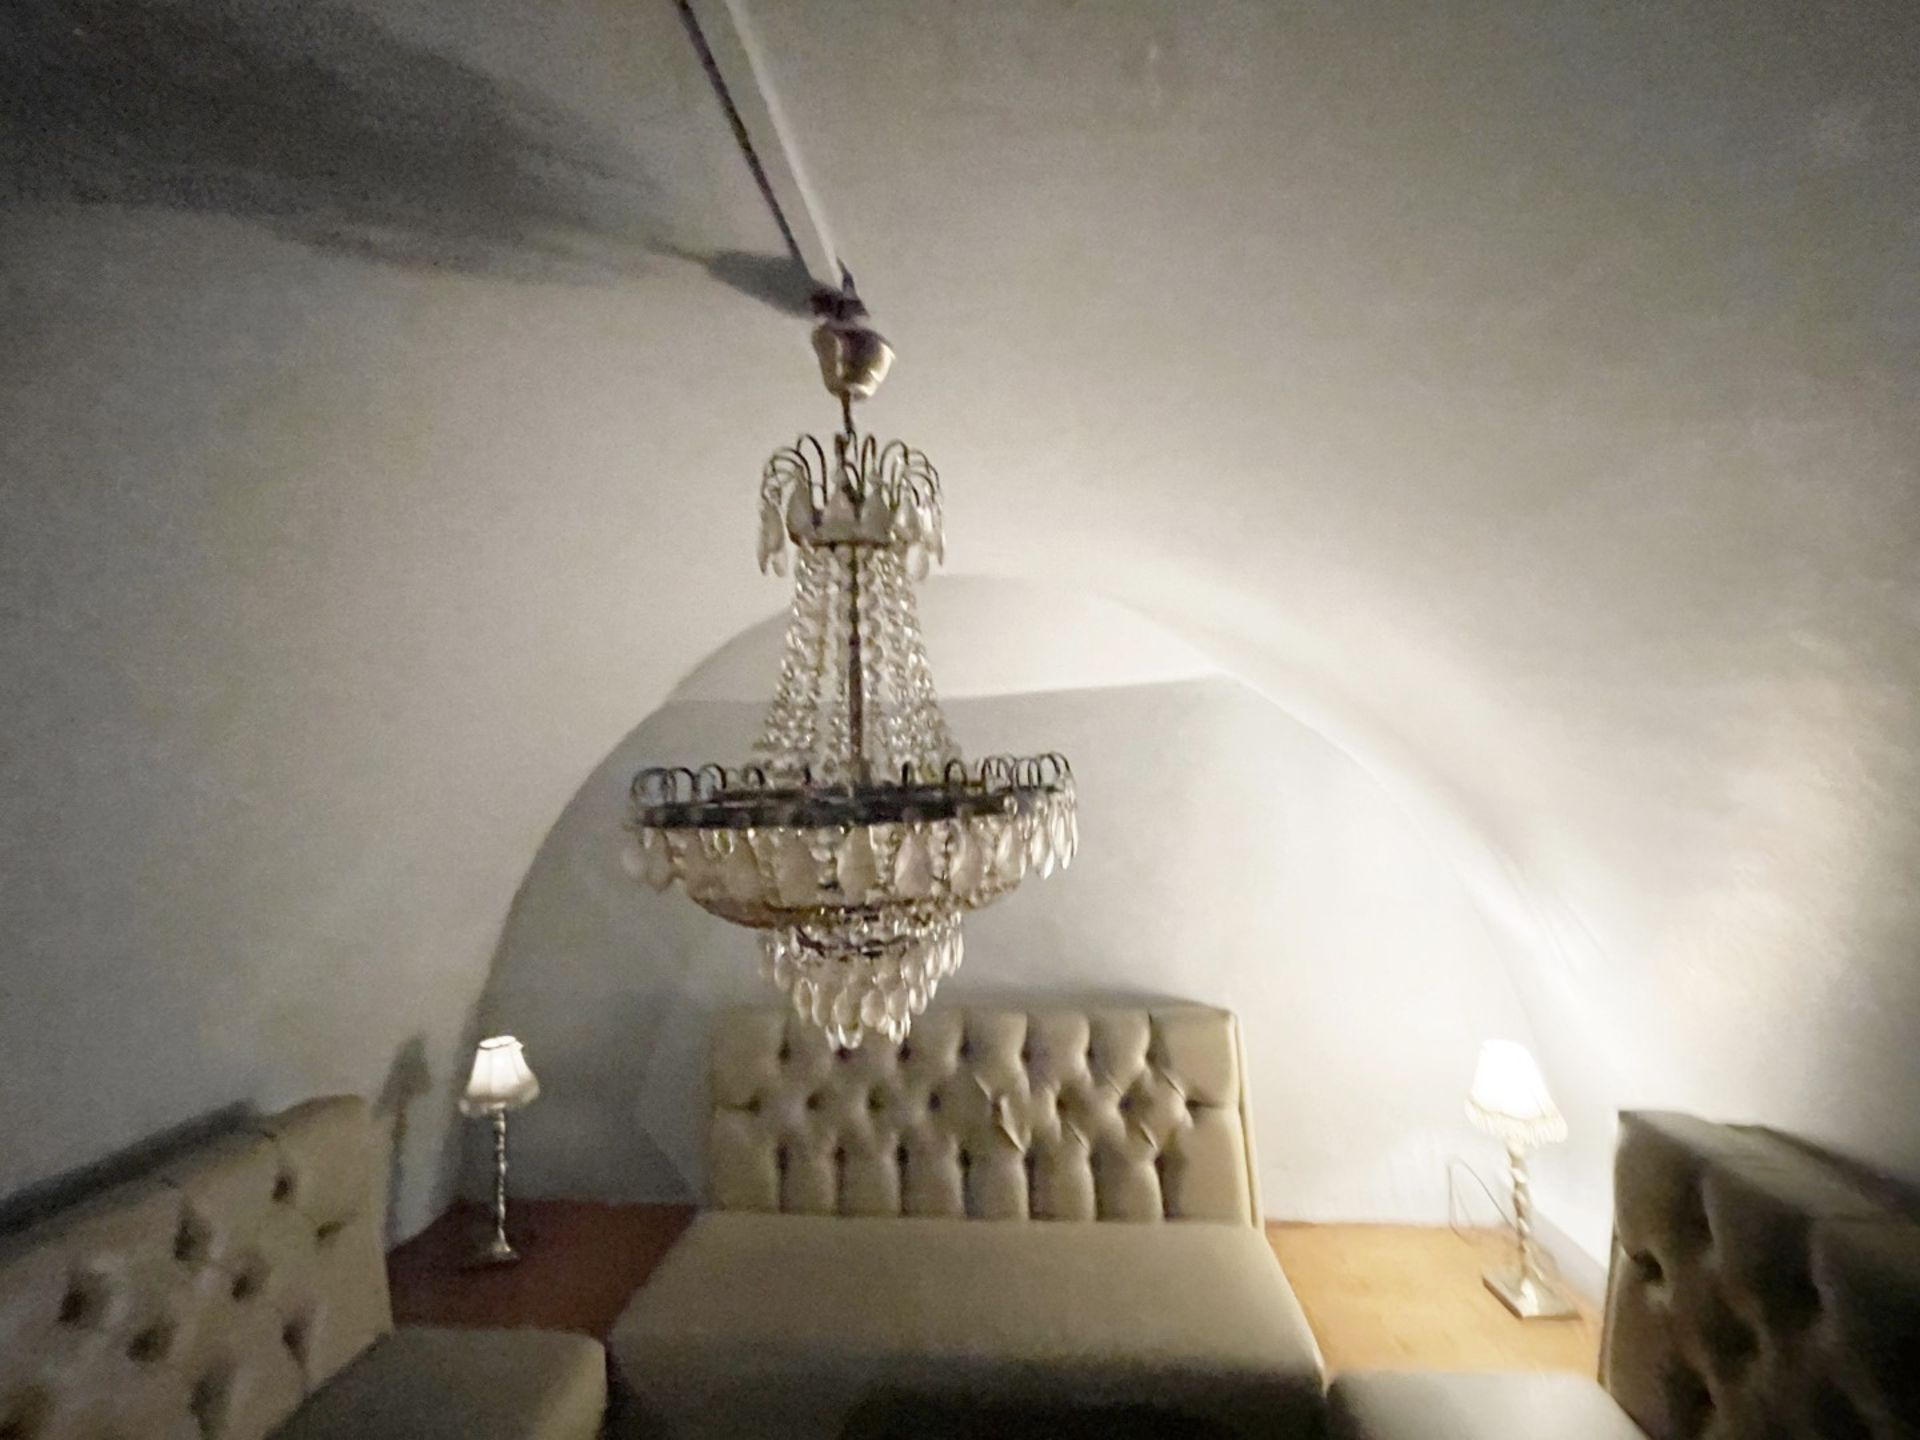 1 x Large Gustavian-style Chandelier Ceiling Pendant Light Adorned with Clear Droplets - Image 5 of 9